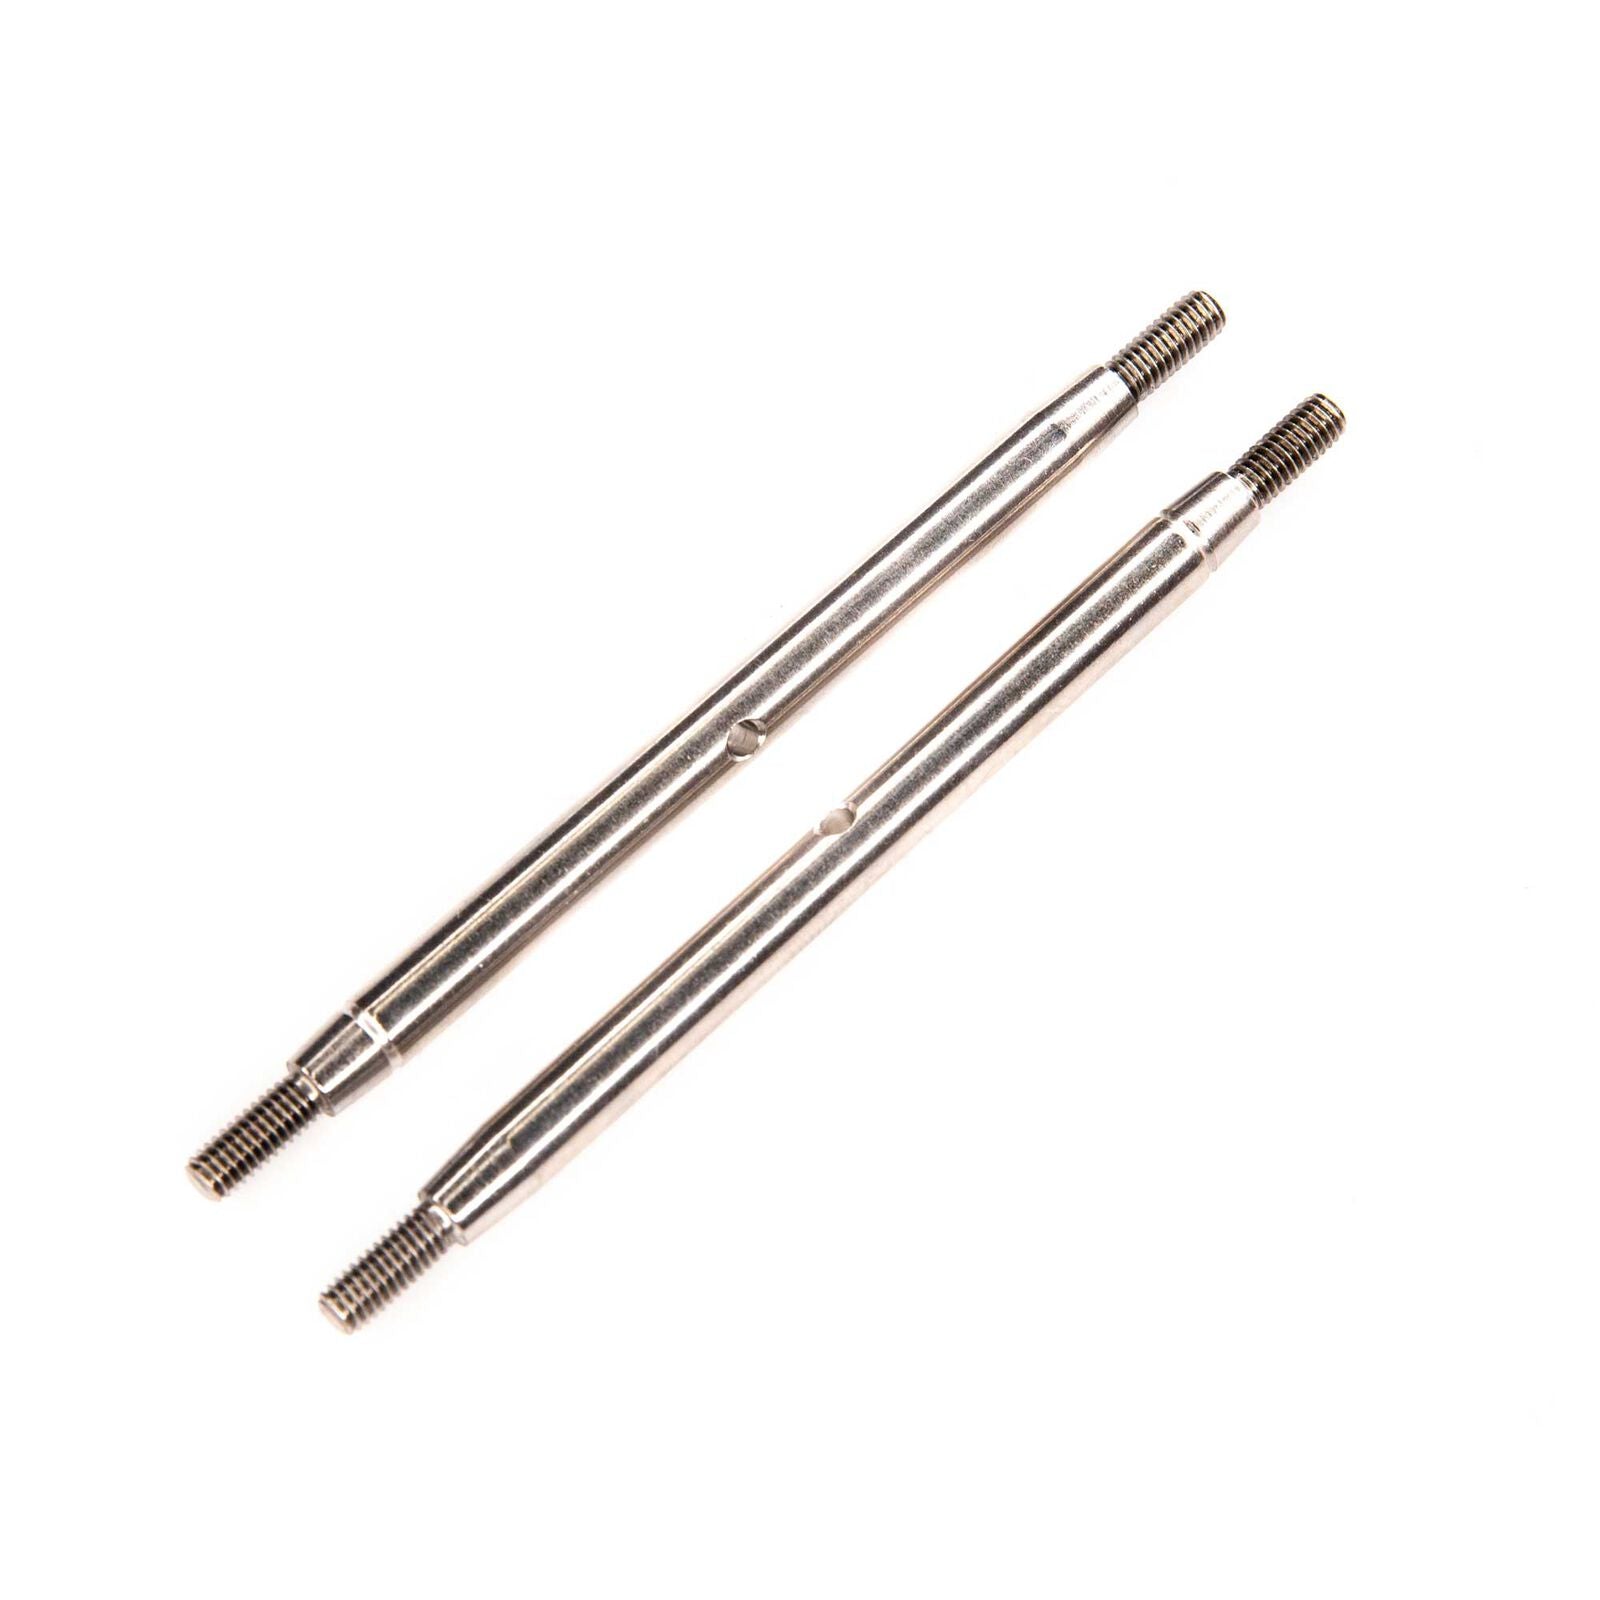 AXIAL AXI234013 Stainless Steel M6x 97mm Link (2pcs): SCX10III